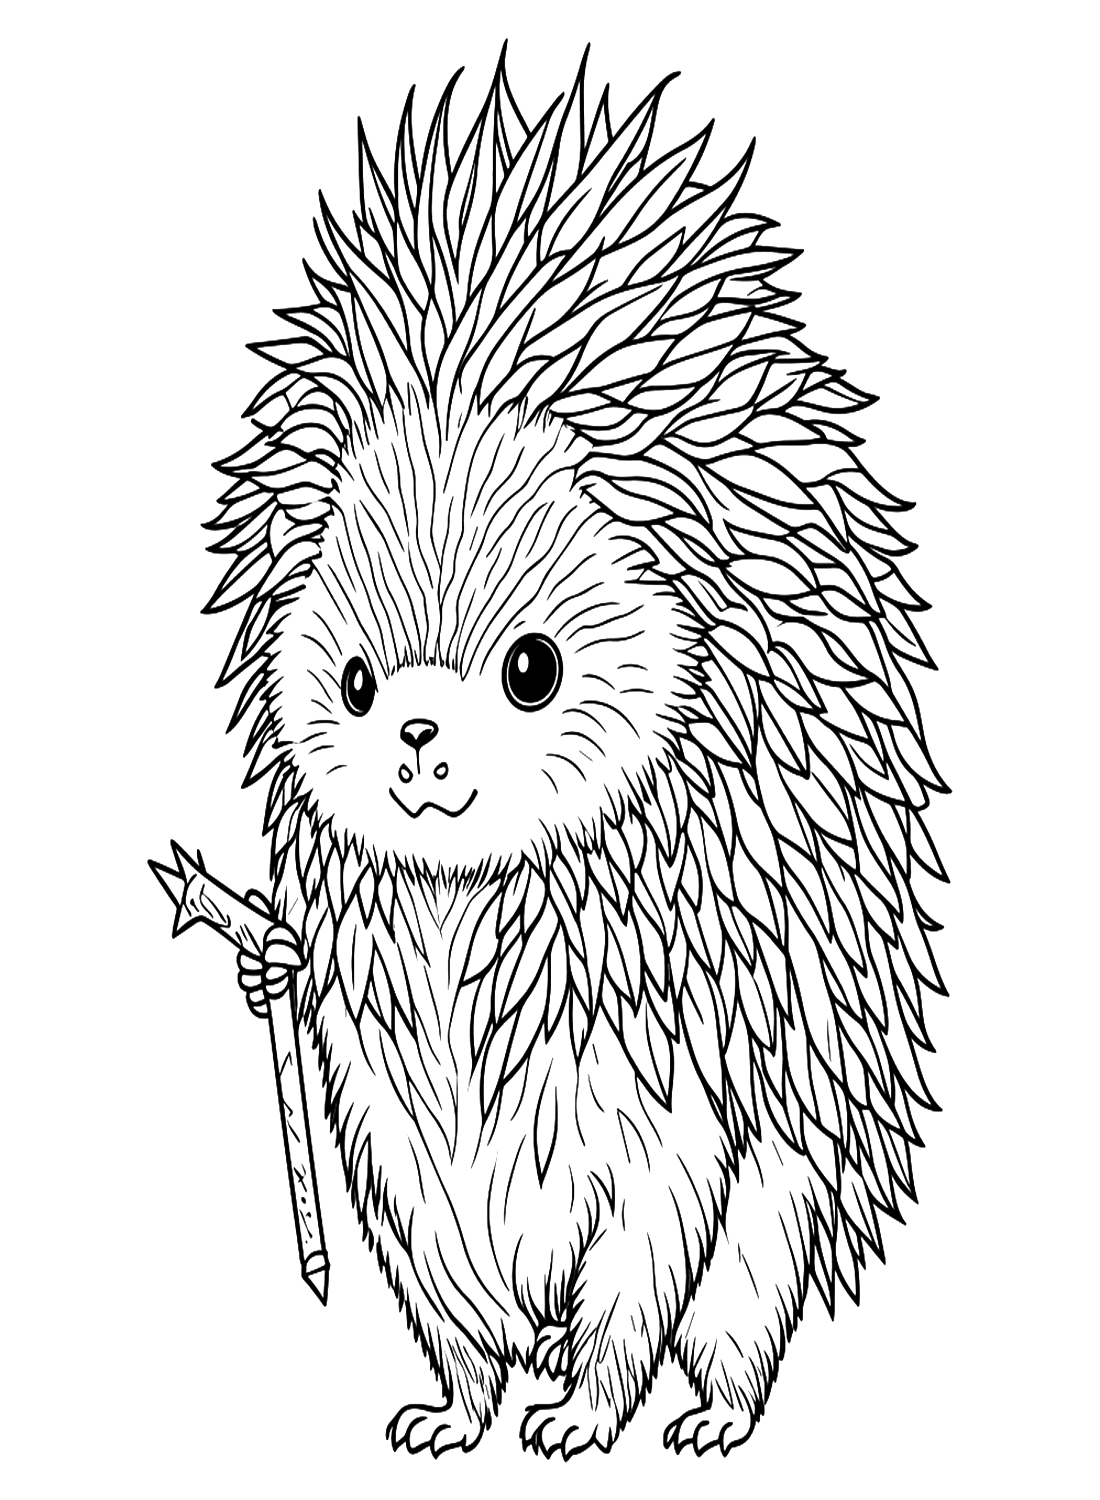 Porcupine Coloring Sheet from Porcupine